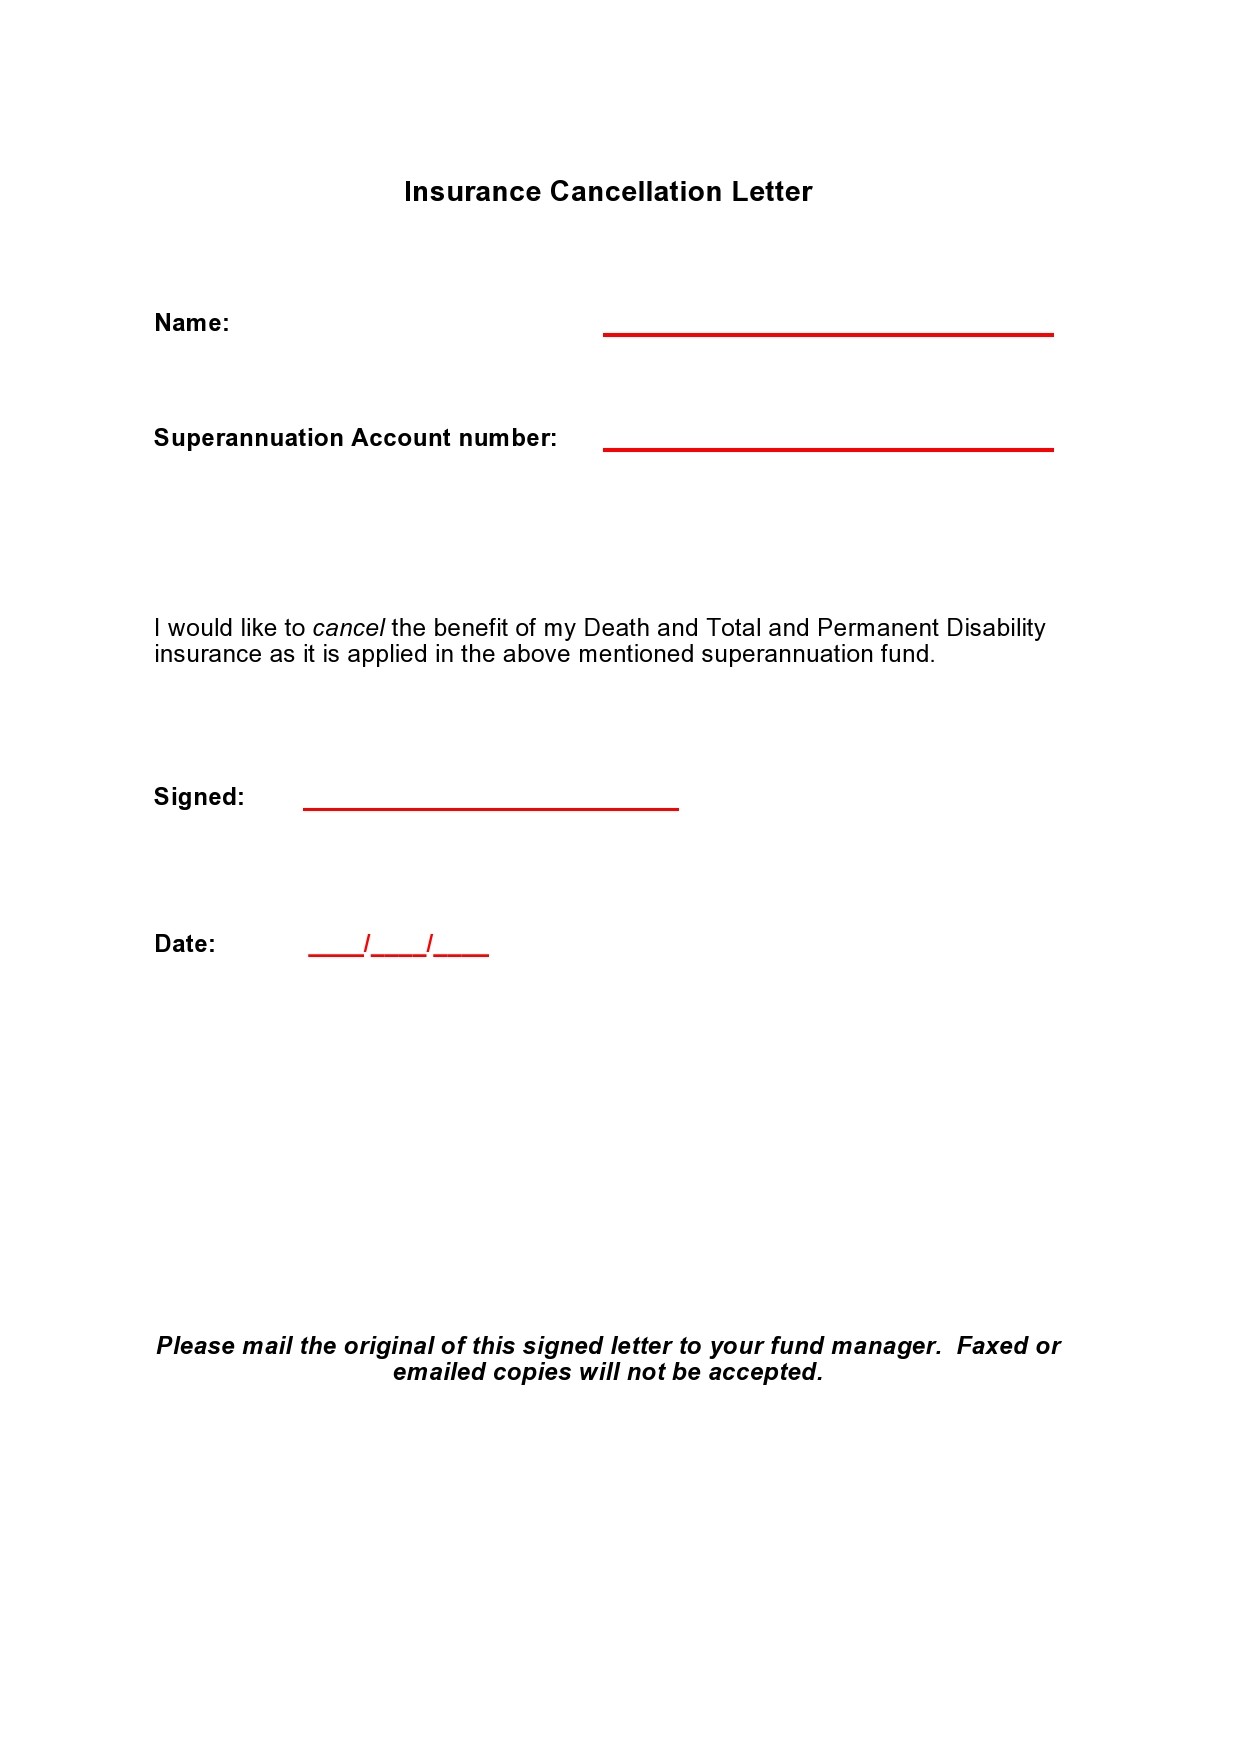 Free insurance cancellation letter 02